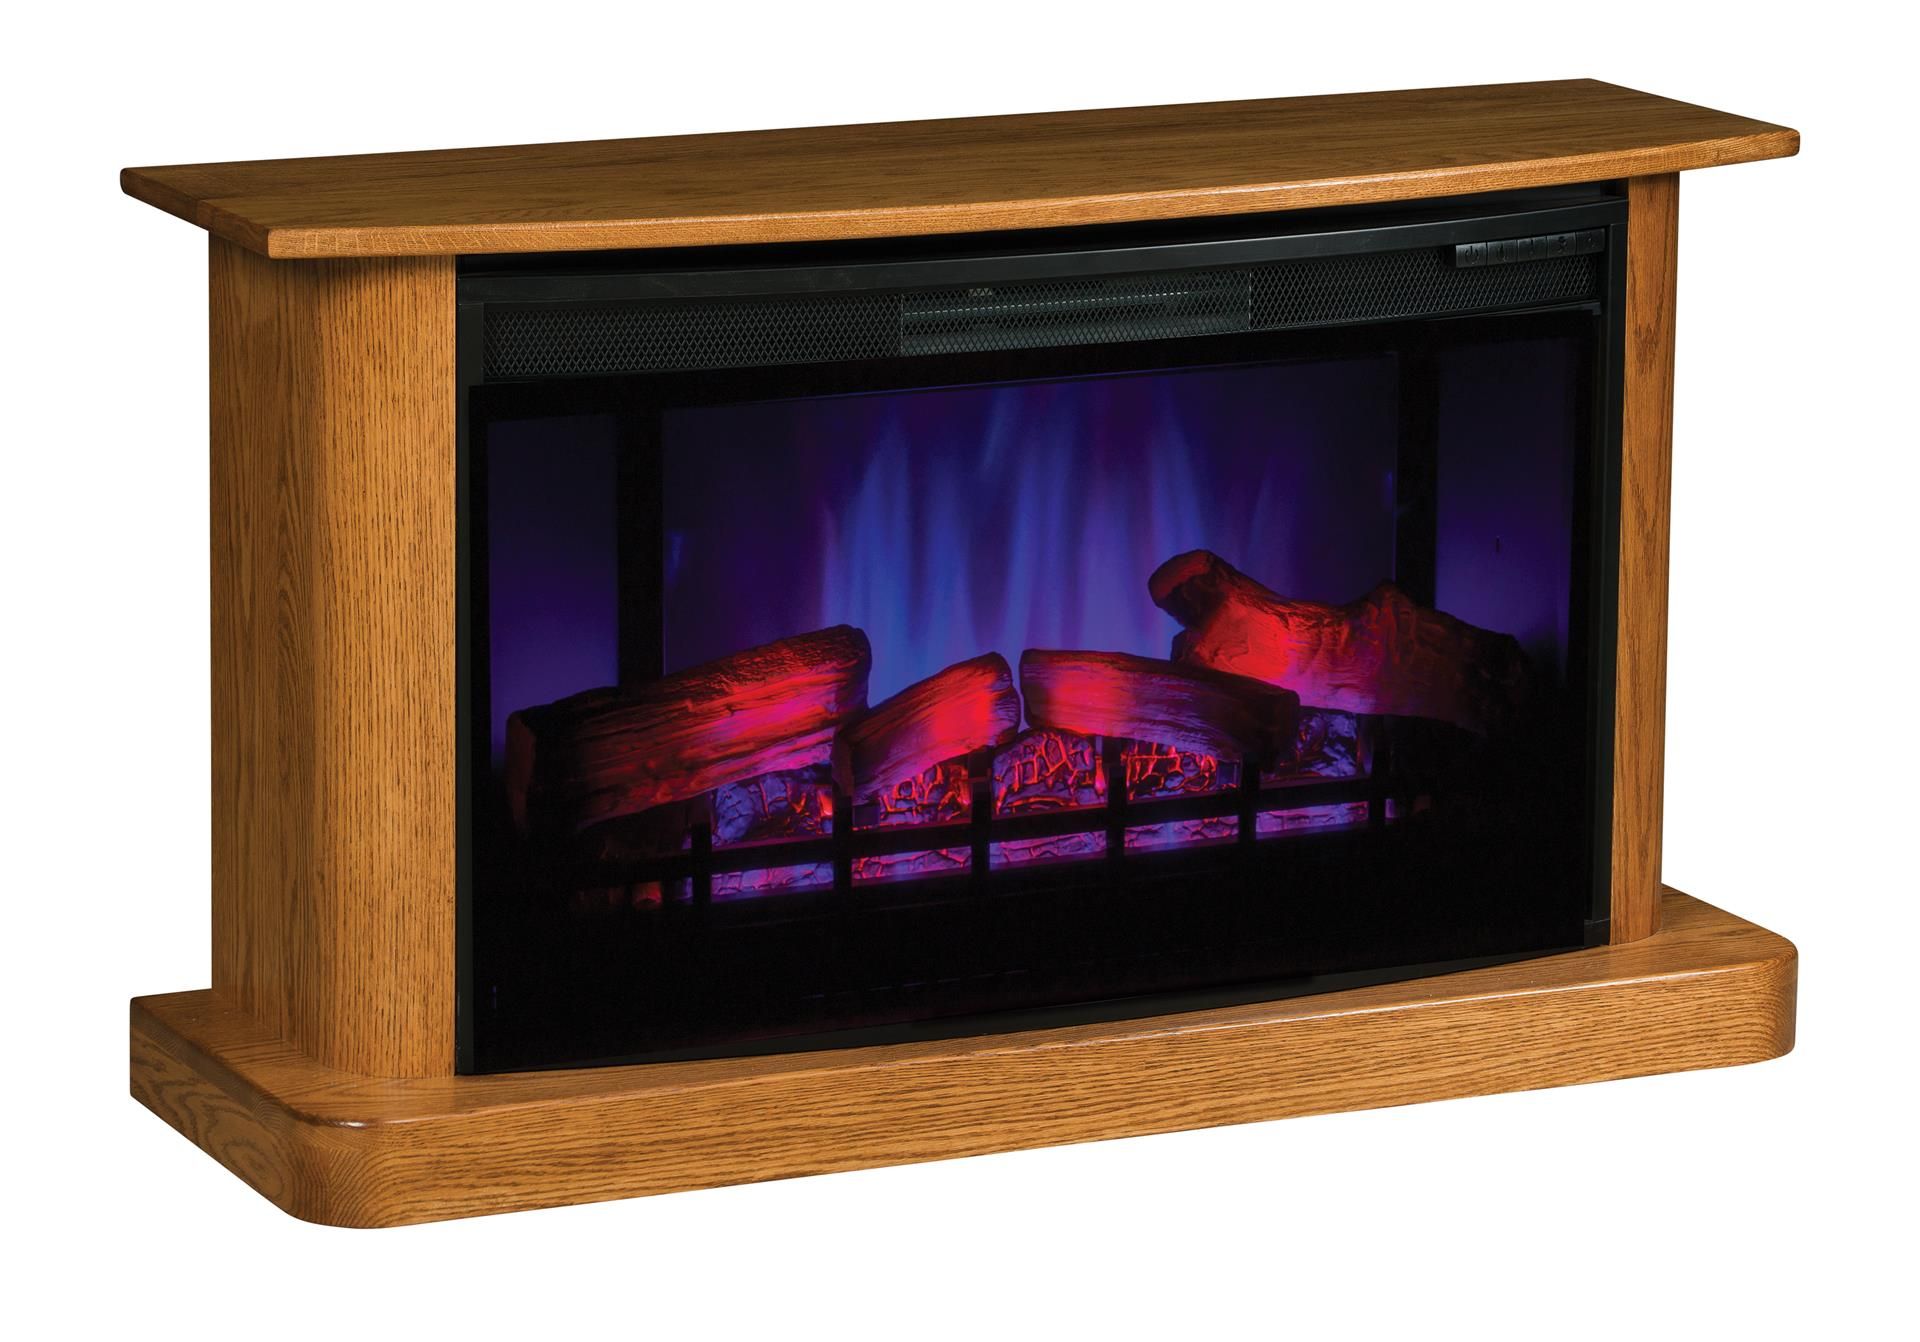 Corner Stone Electric Fireplace Beautiful Amish Electric Fireplace with Remote